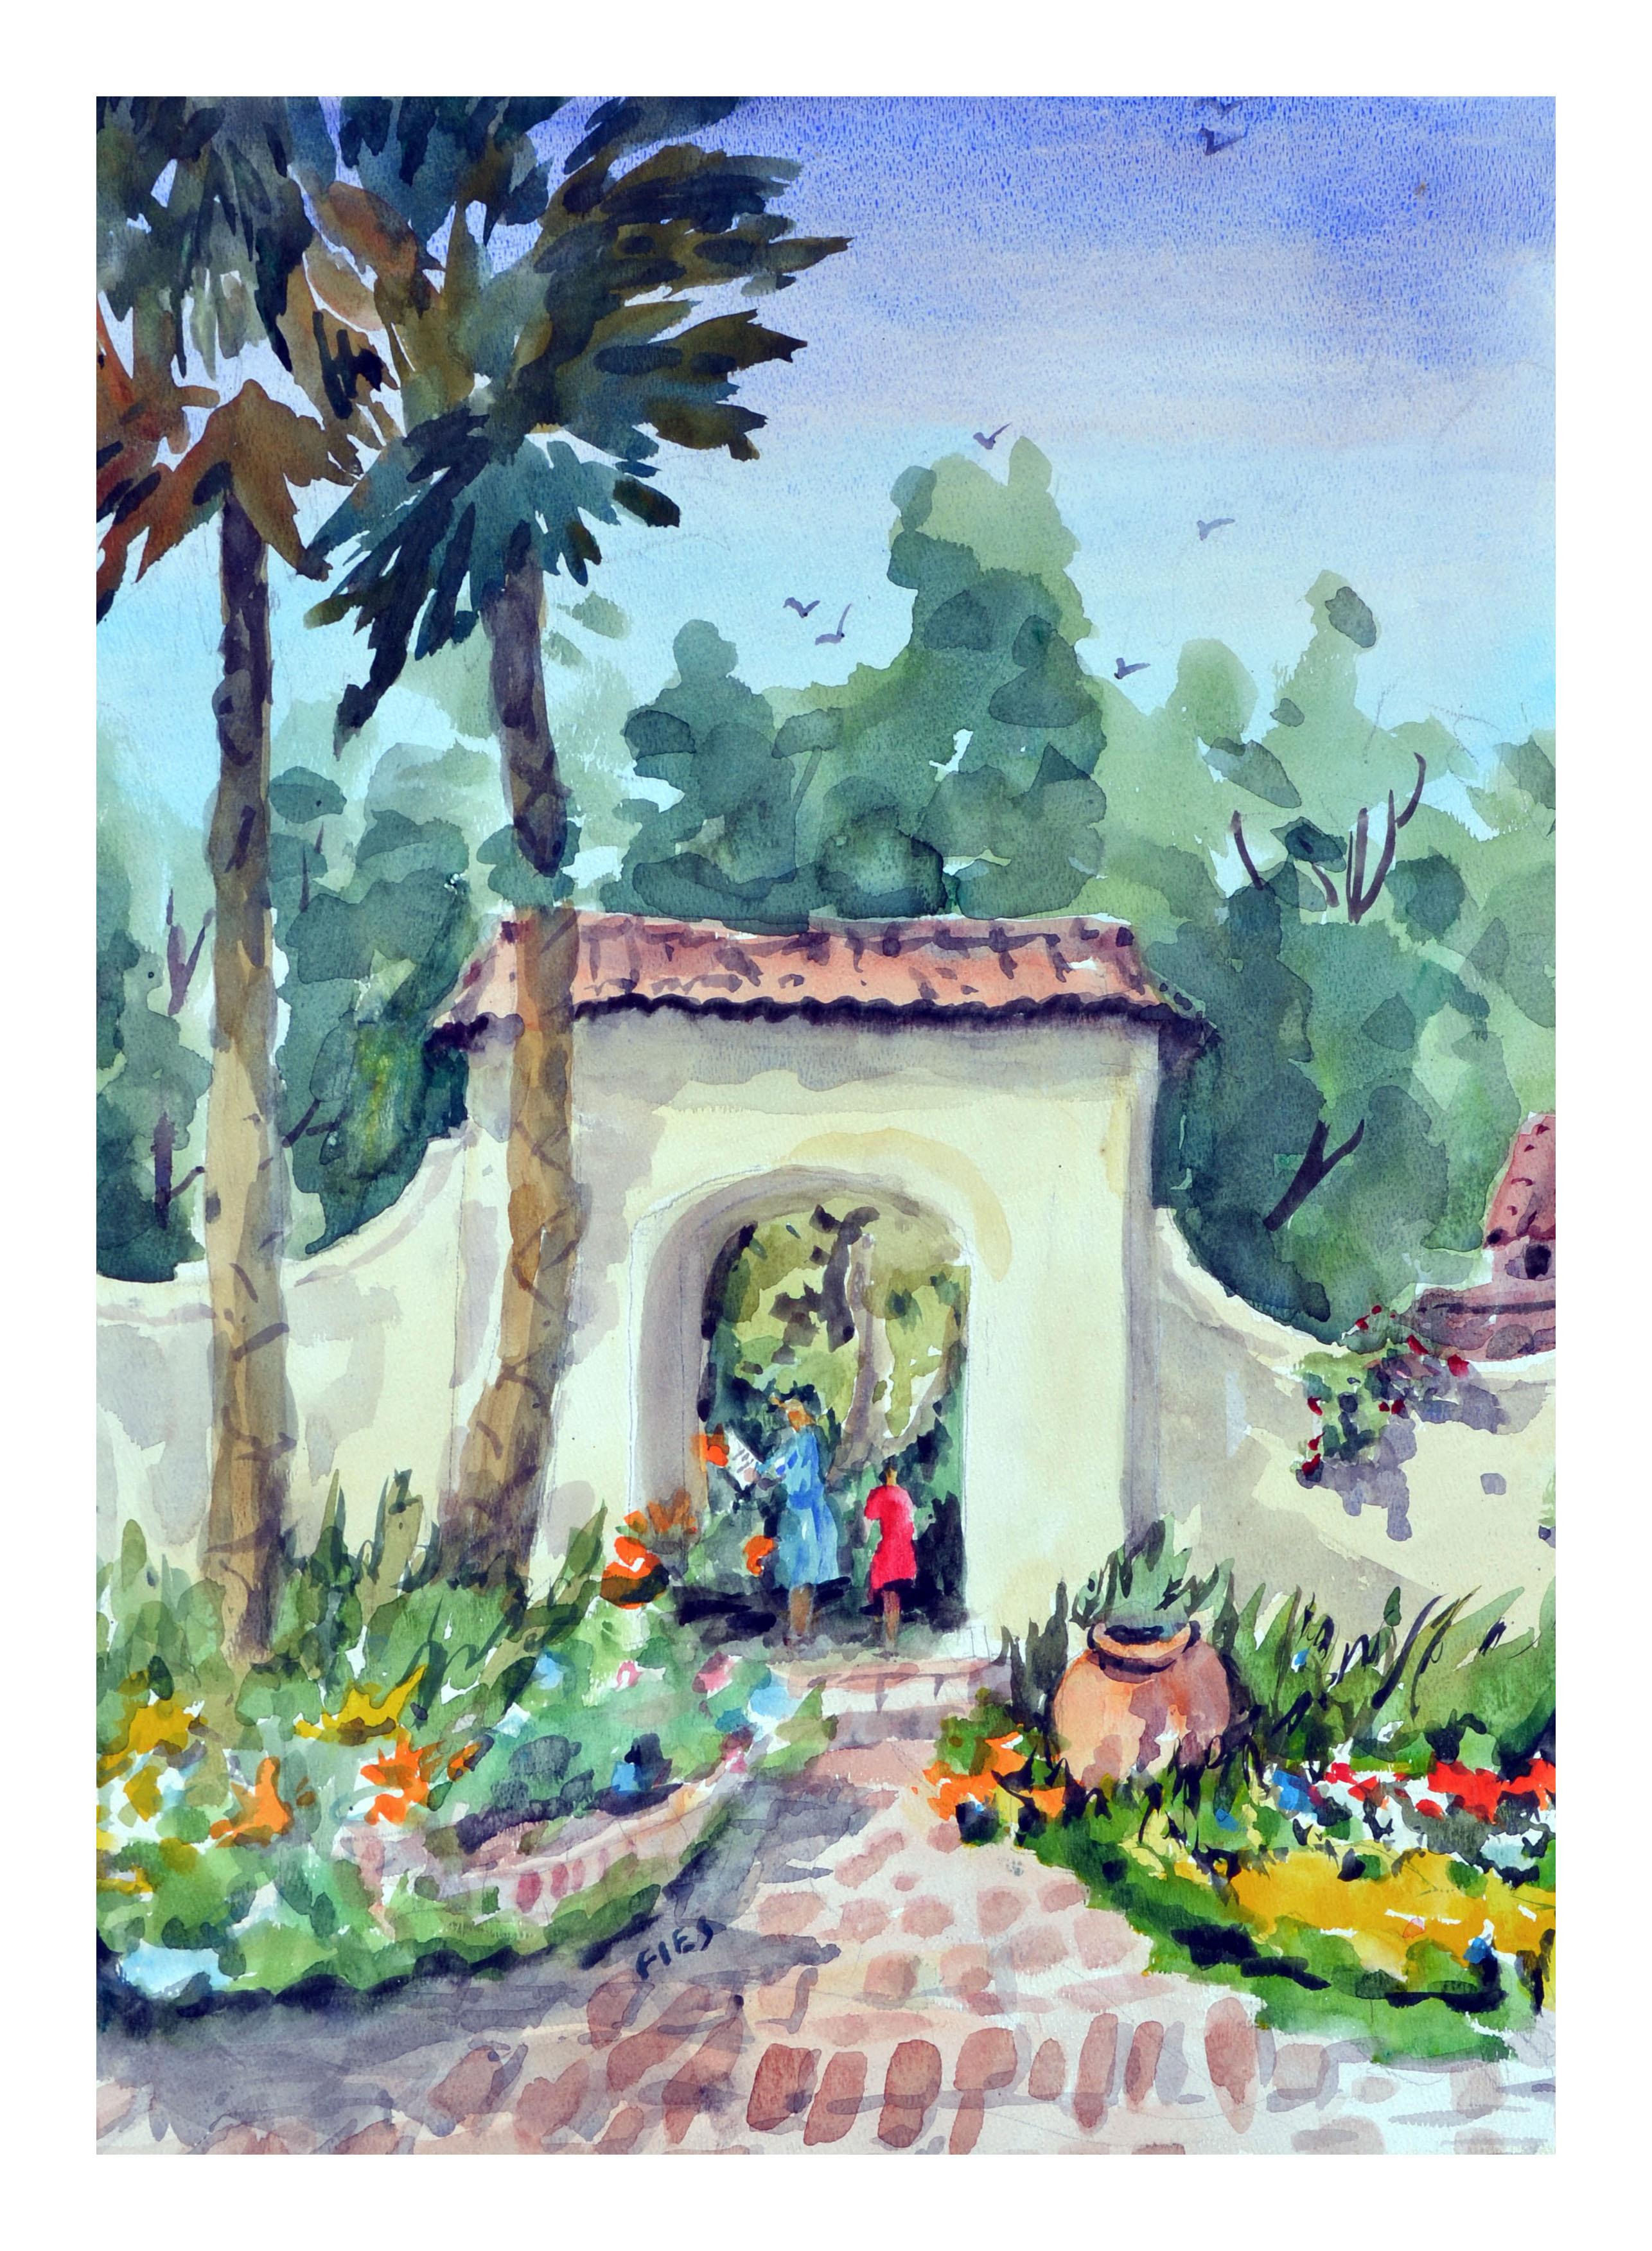 The Mission Entrance - Painting by Gladys Louise Bowman Fies